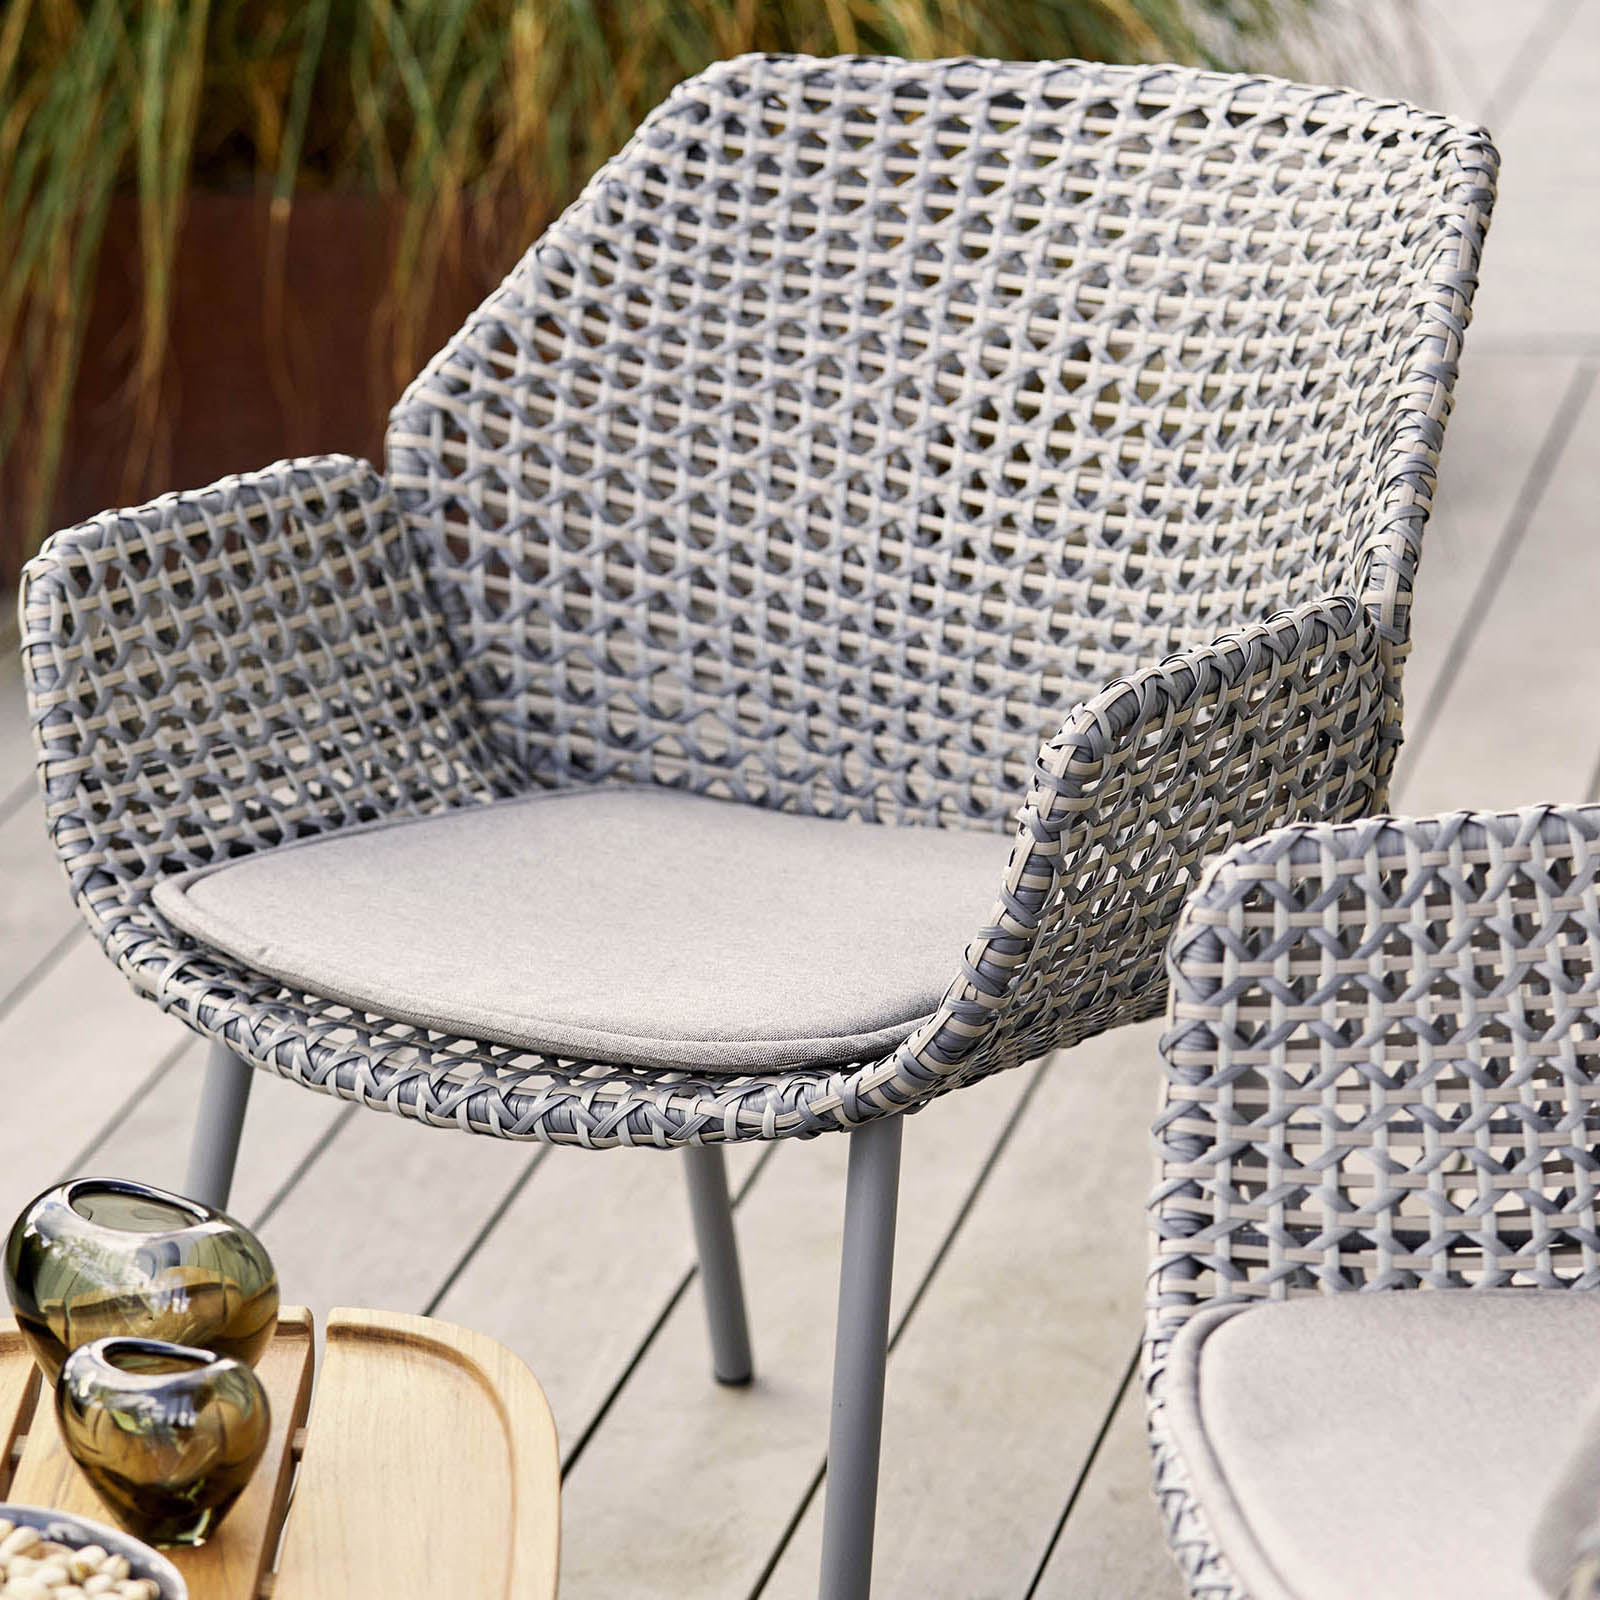 Vibe Loungesessel aus Cane-line Weave in Graphite mit Kissen aus Cane-line Wove in Light Brown